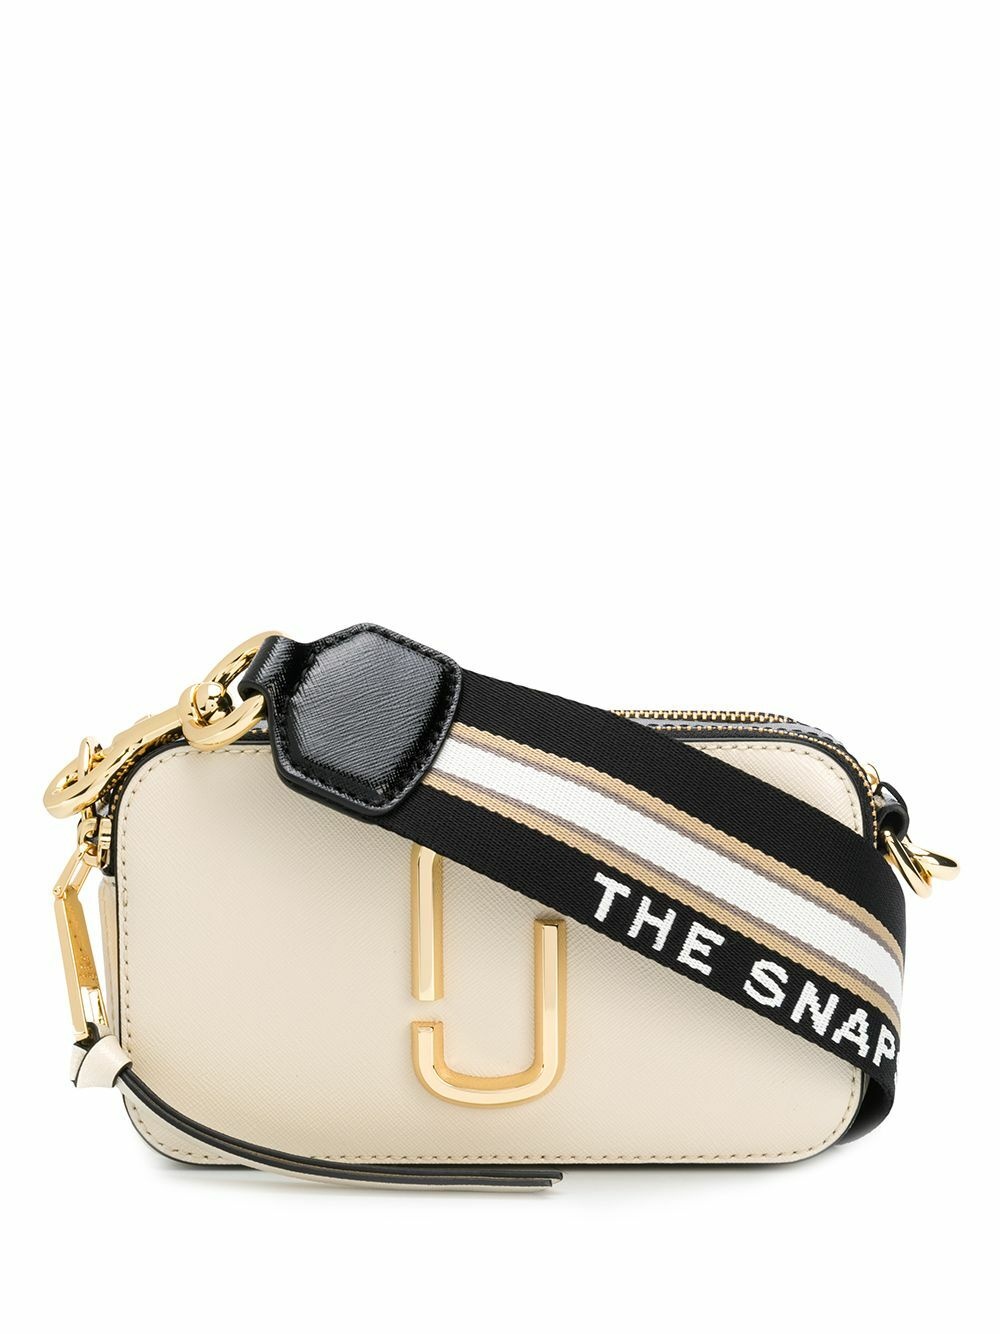 Marc Jacobs The Snapshot leather crossbody bag